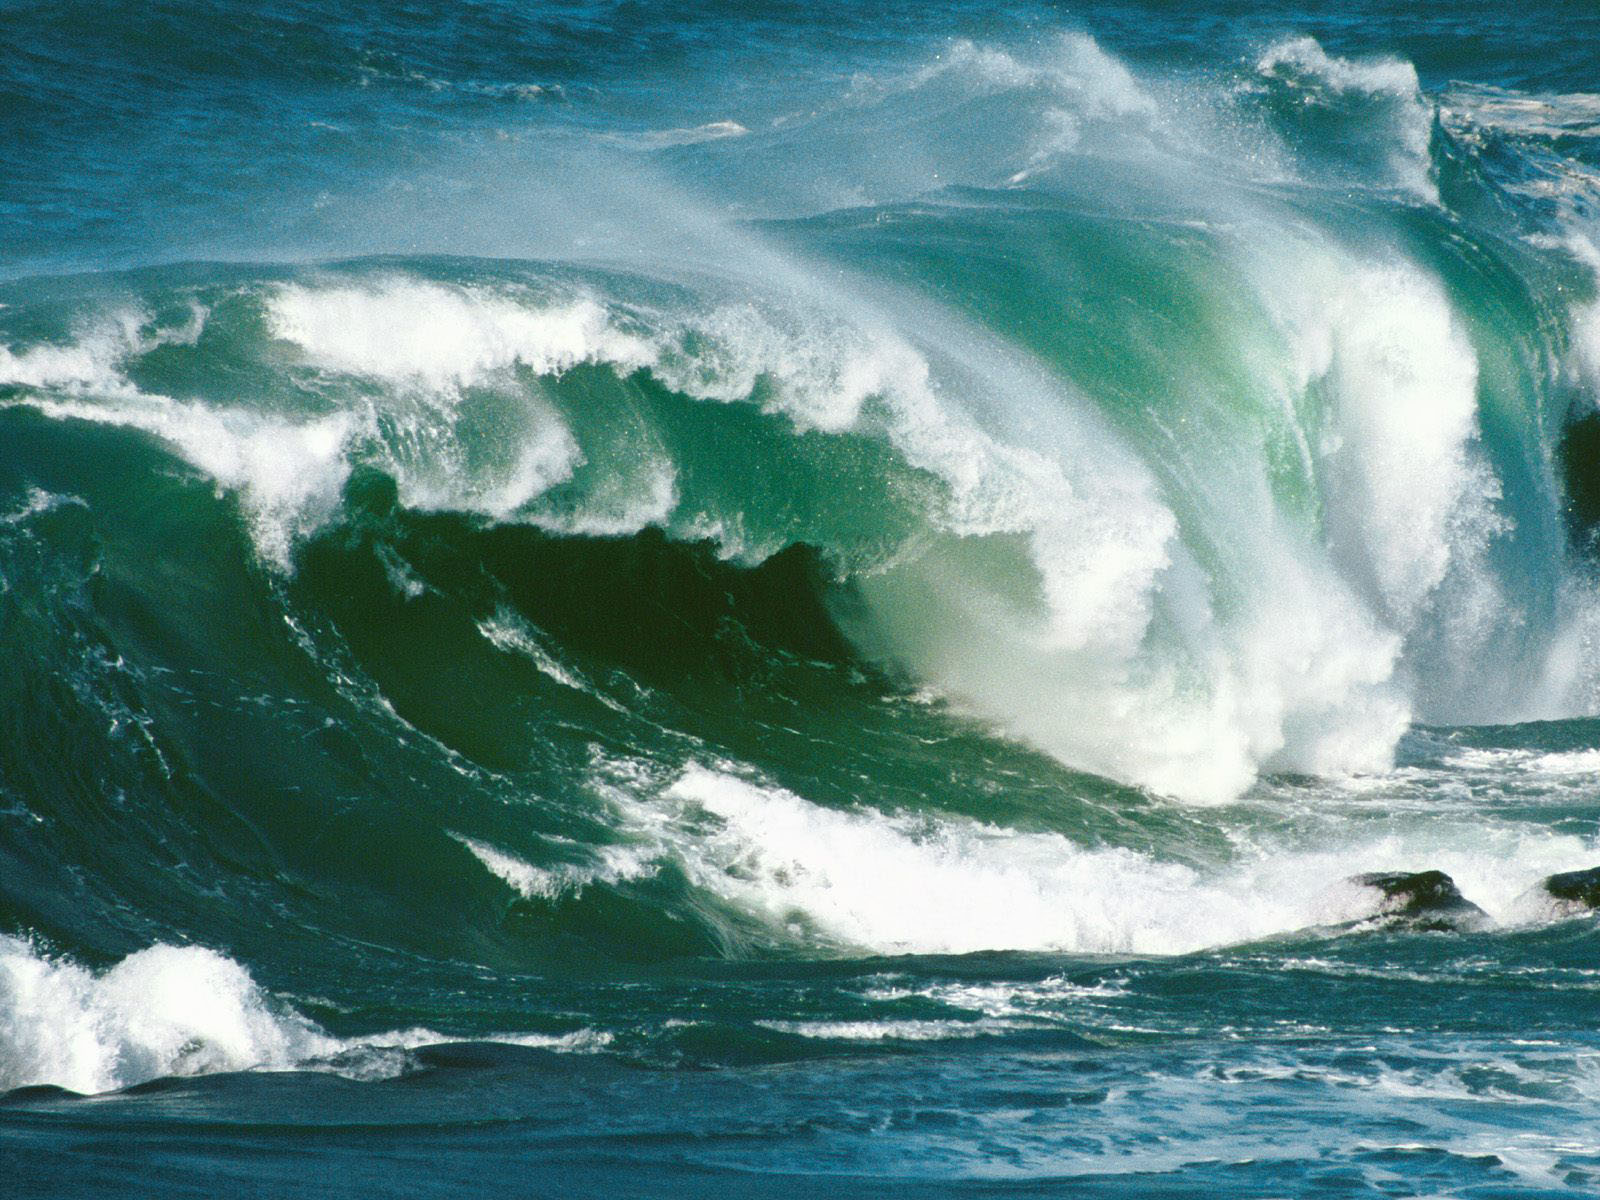 Tag Storm Waves Wallpaper Image Photos And Pictures For